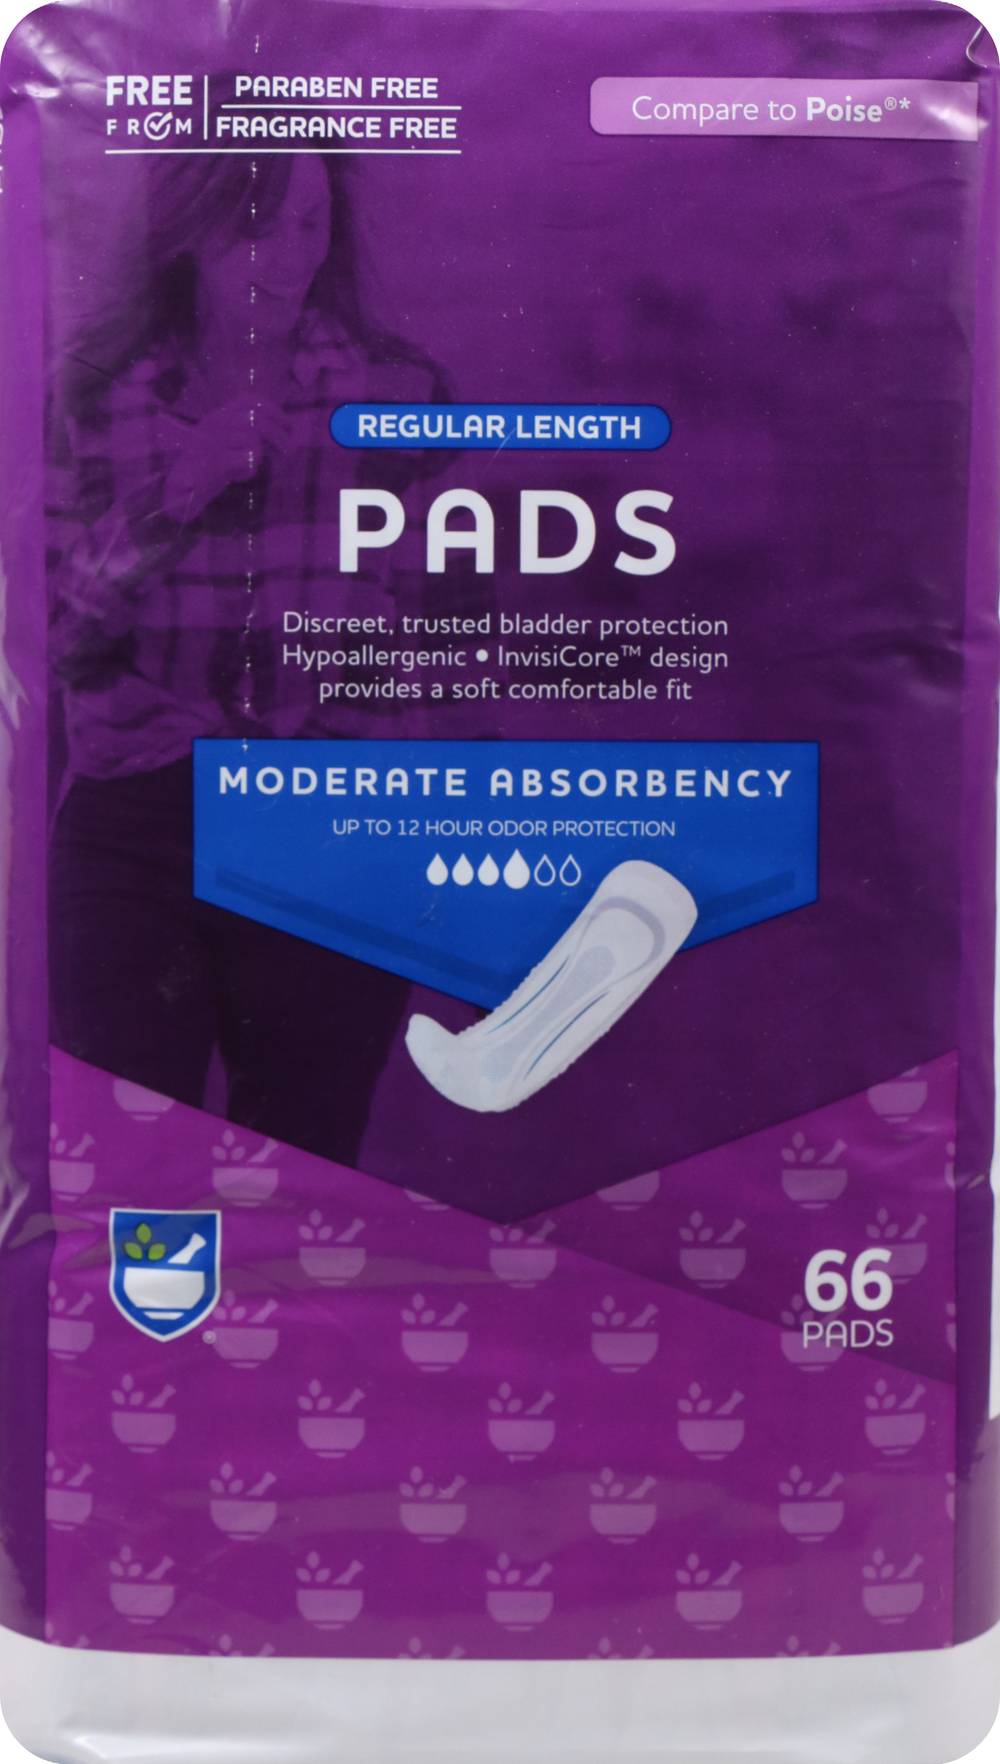 Rite Aid Pharmacy Pads, Moderate Absorbency, Regular Length - 66 ct